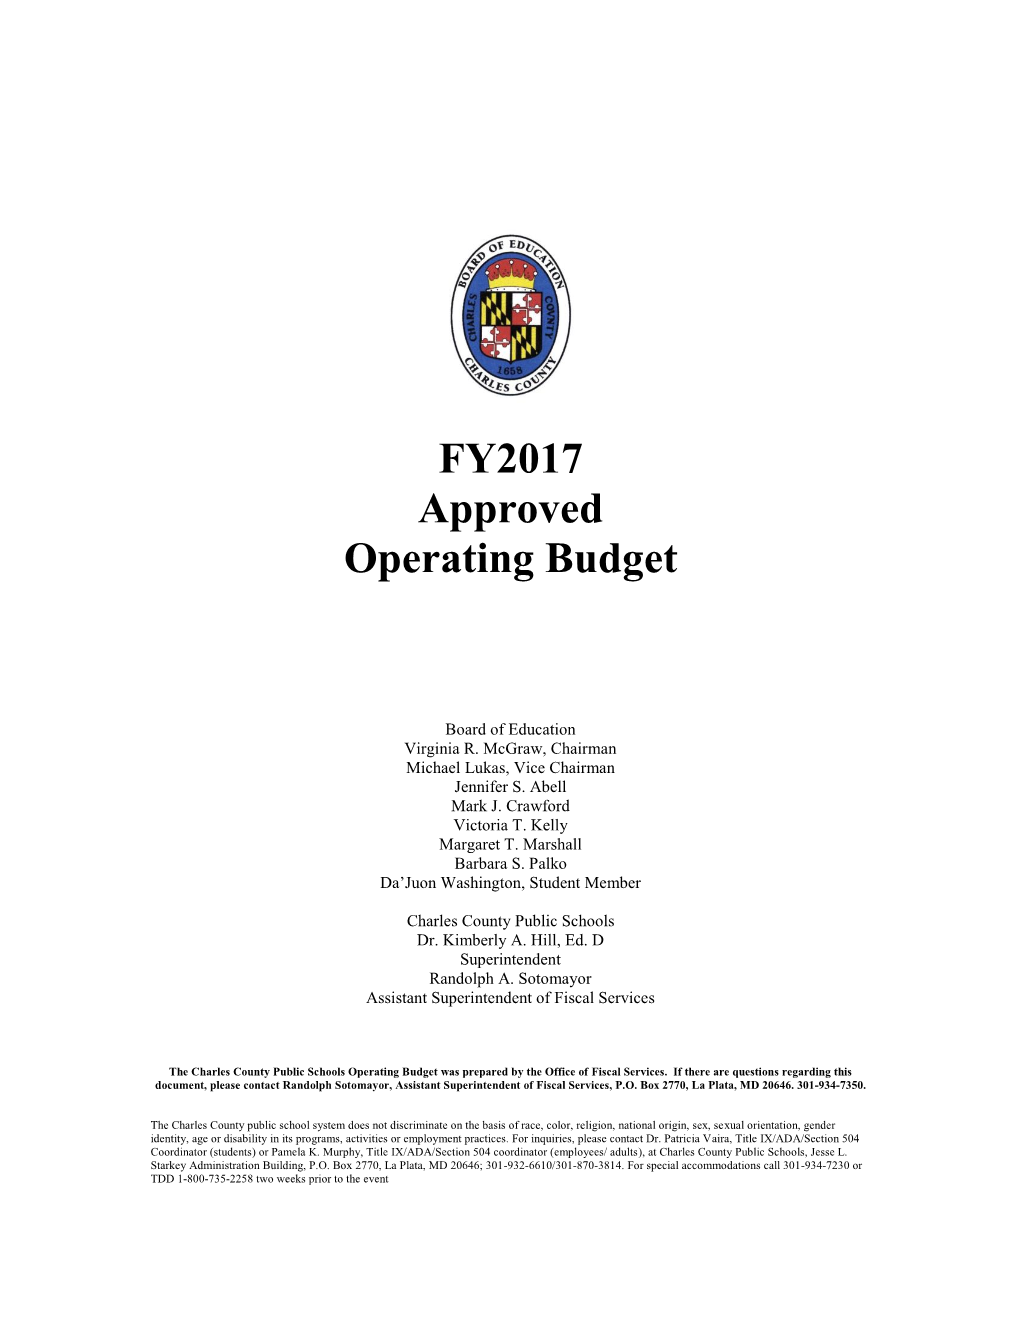 FY2017 Approved Operating Budget